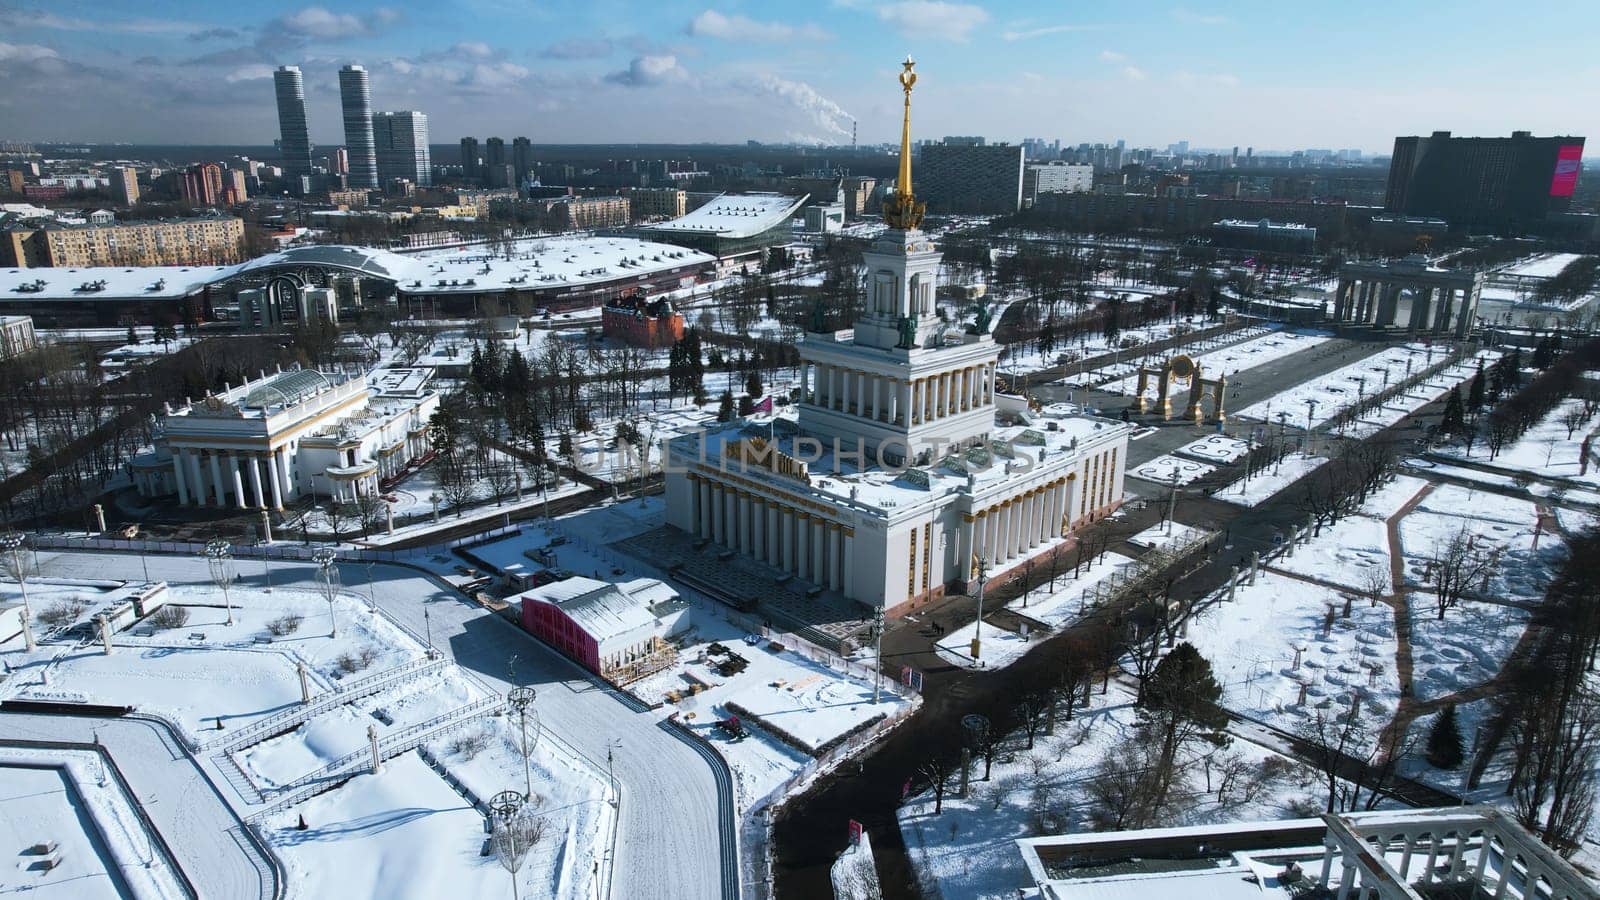 Top view of large square with historical architecture in winter. Creative. Historic square with alleys and Soviet architecture in city center. Winter landscape with Soviet architecture on background of horizon with city by Mediawhalestock